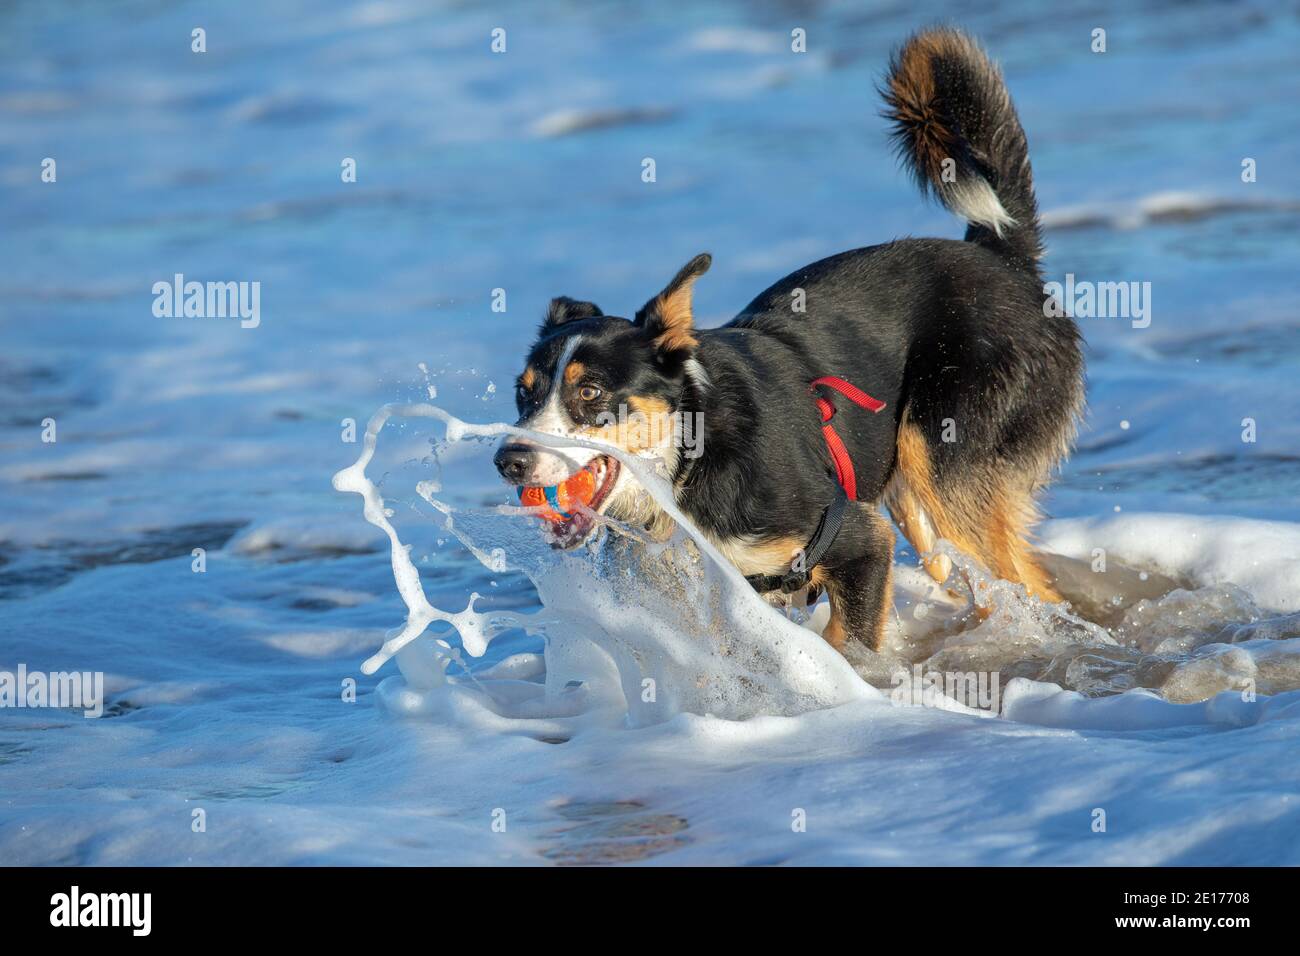 Tri-coloured Border Collie Dog (Canis familiaris). Domestic animal, pet, companion, shepherding breed. Fetching, carrying ball in mouth. Sea side. Stock Photo